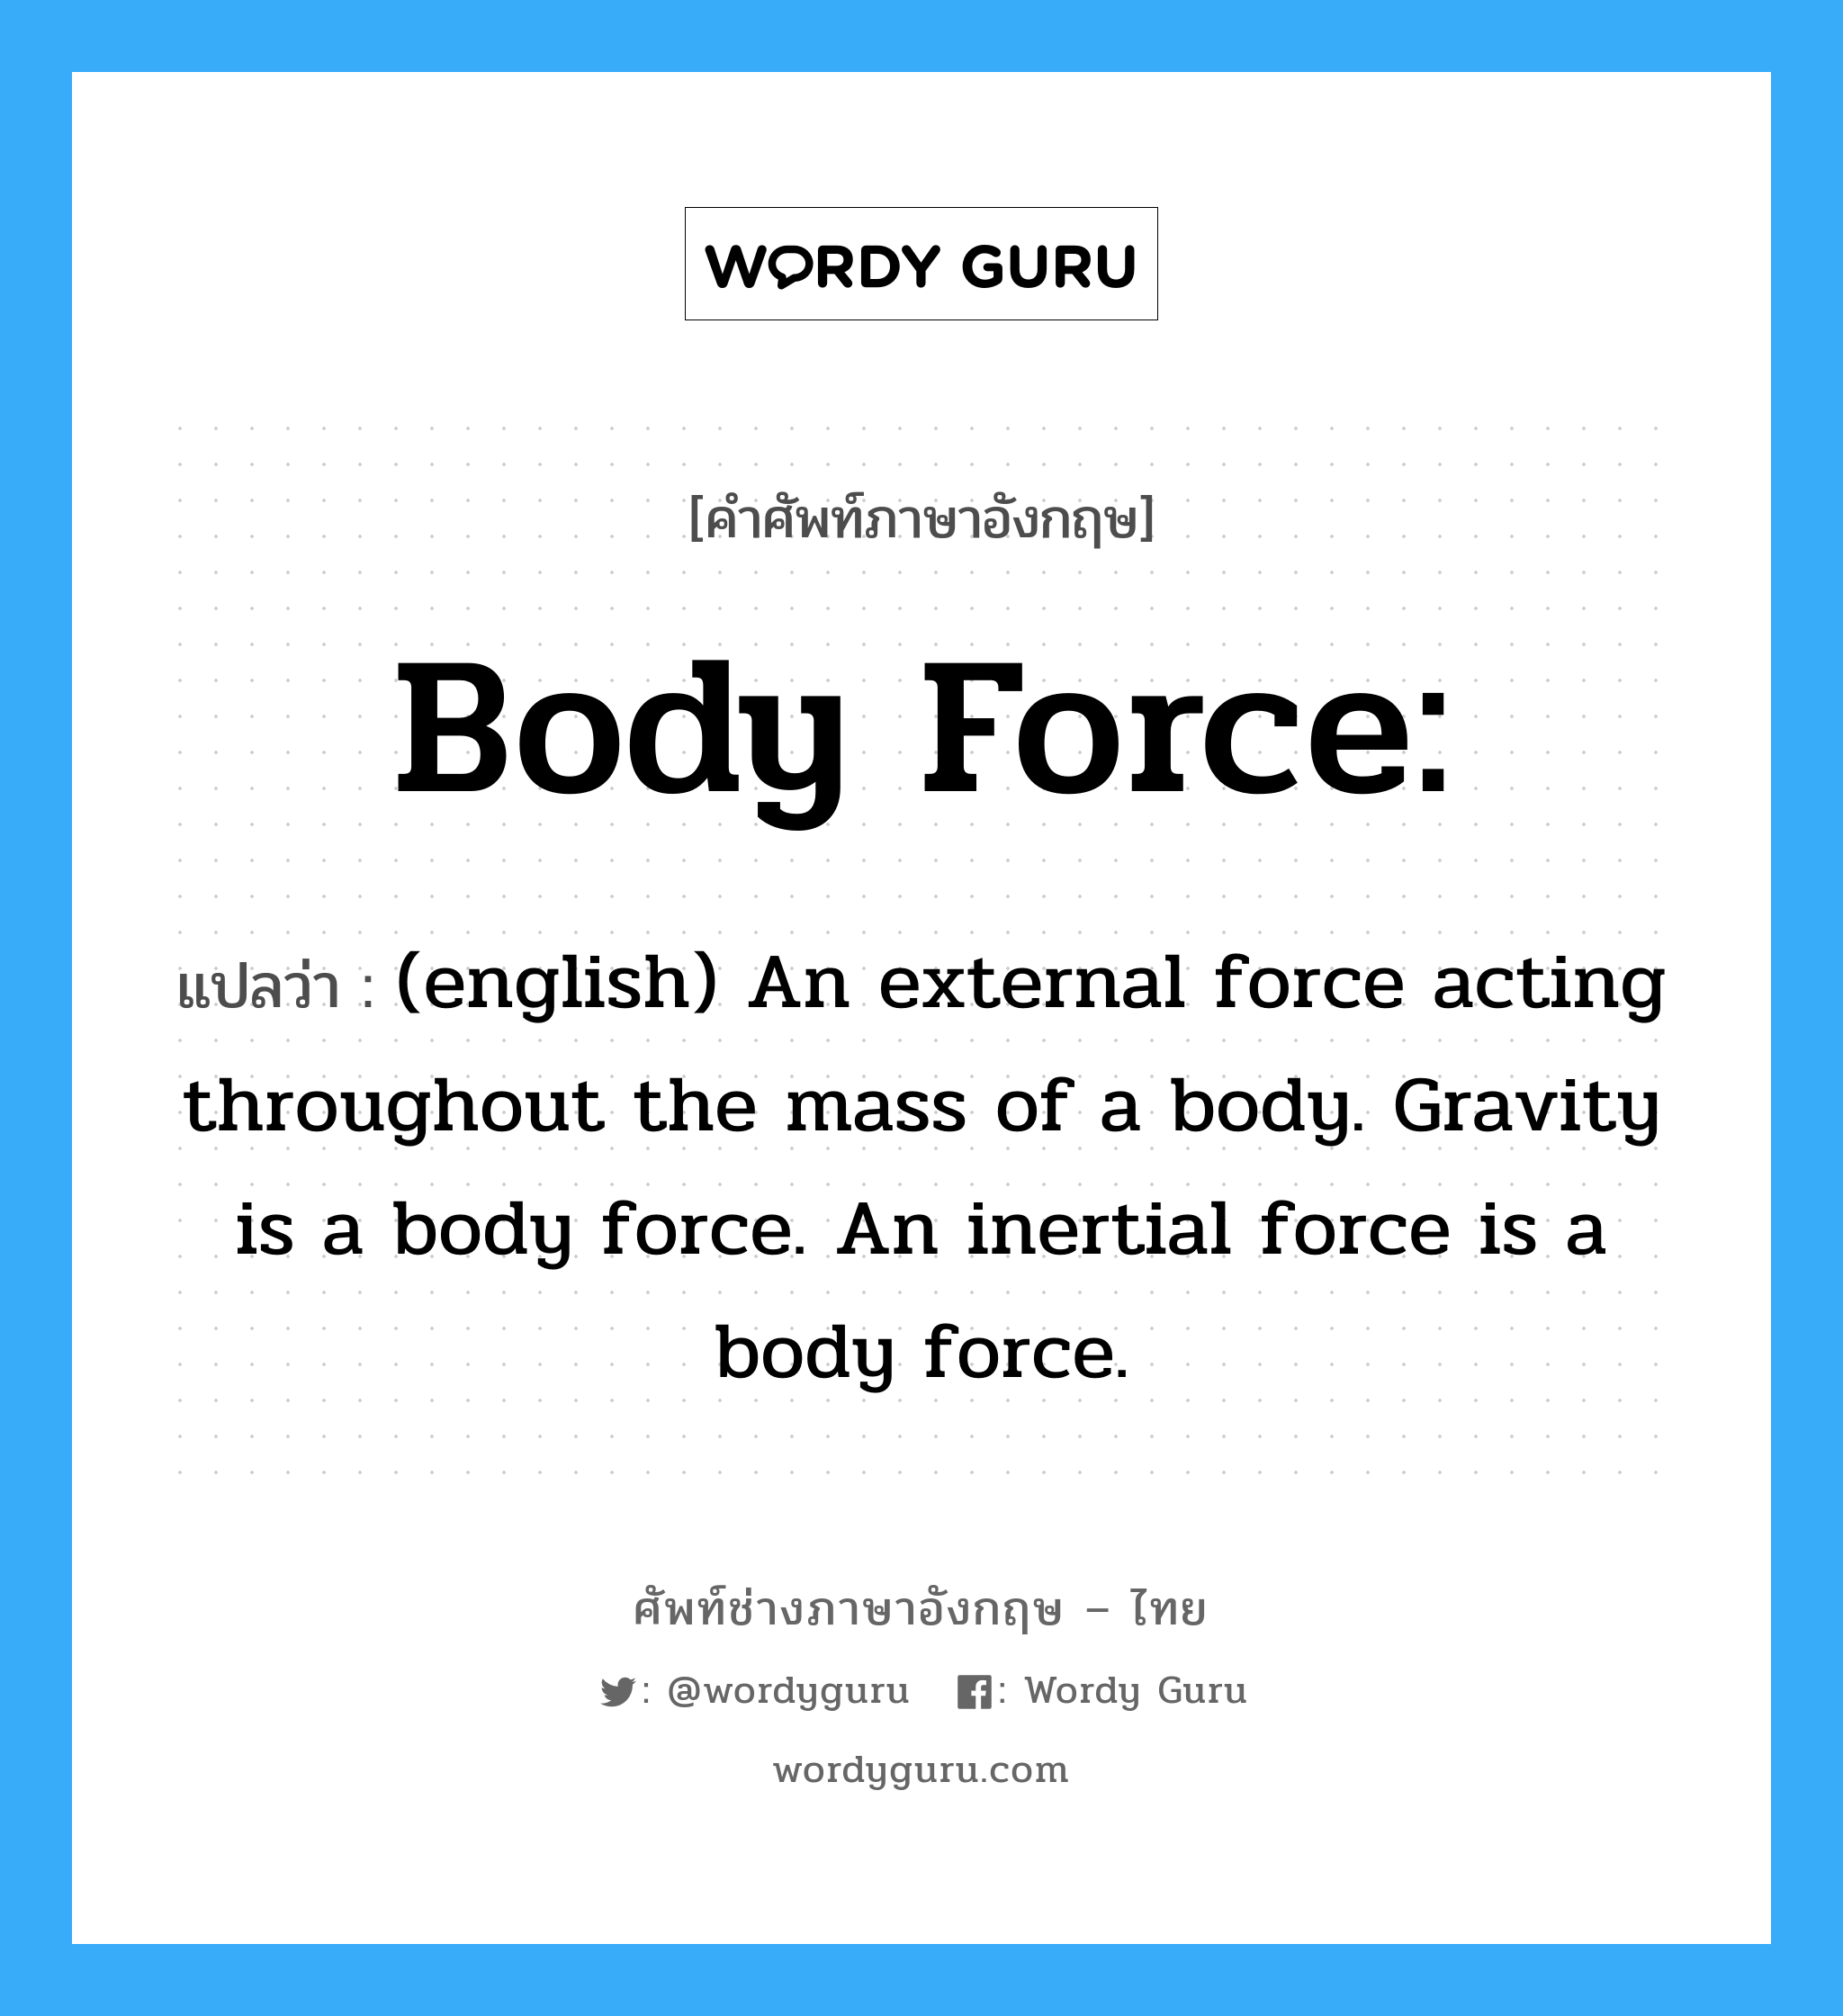 Body force: แปลว่า?, คำศัพท์ช่างภาษาอังกฤษ - ไทย Body force: คำศัพท์ภาษาอังกฤษ Body force: แปลว่า (english) An external force acting throughout the mass of a body. Gravity is a body force. An inertial force is a body force.